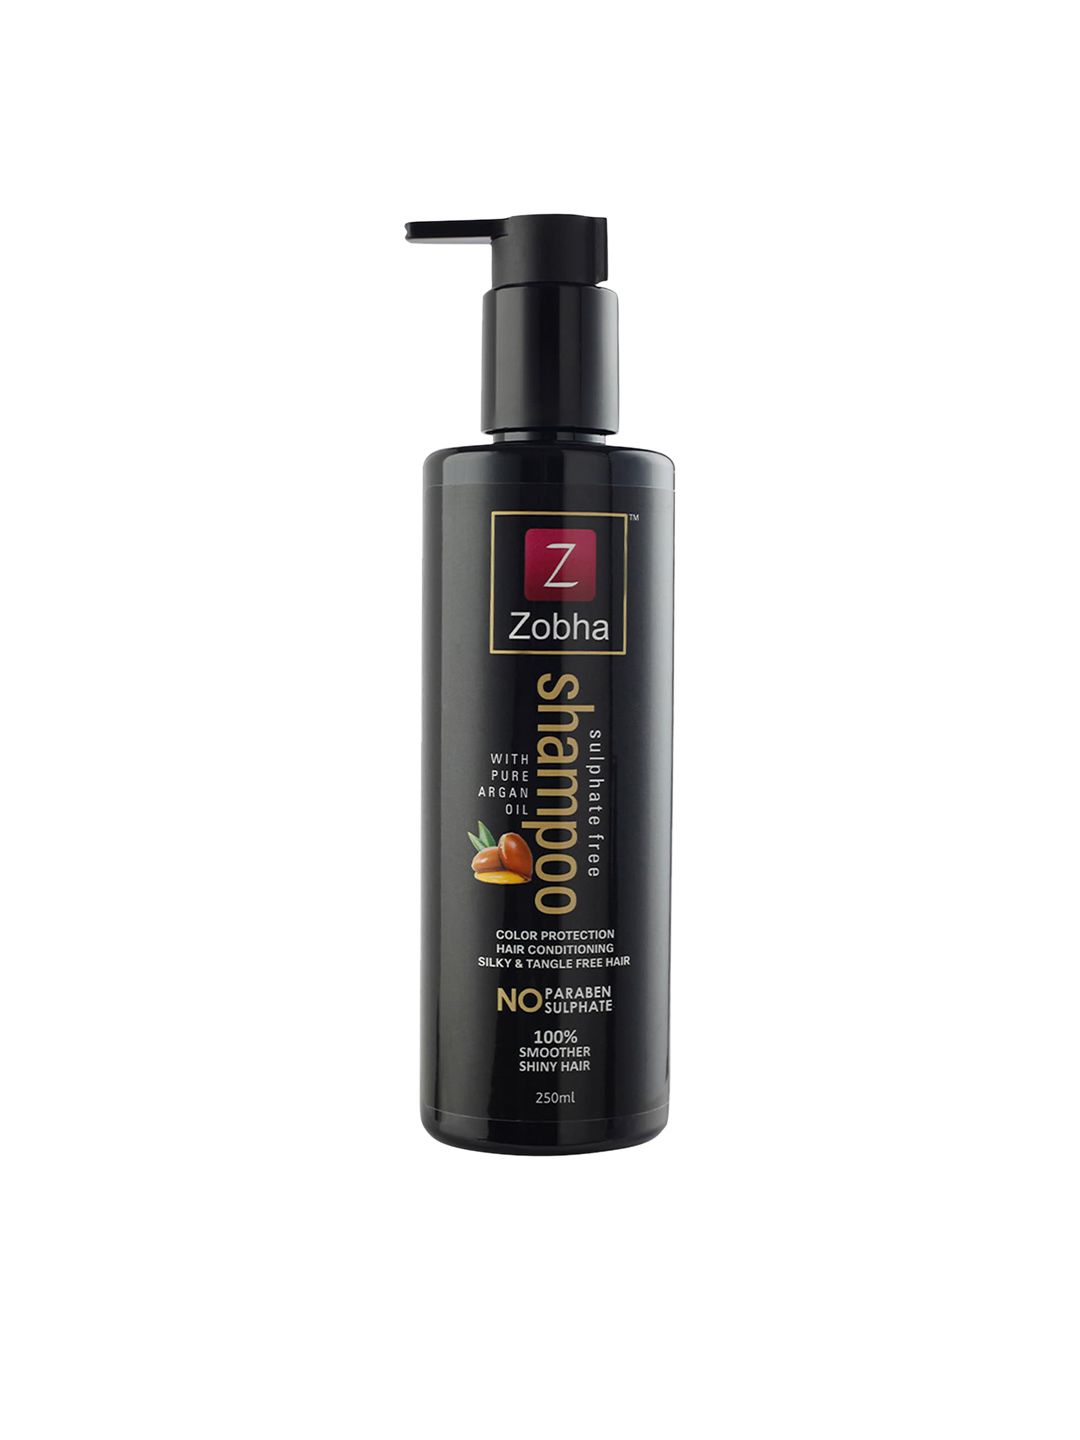 Zobha Sulphate Free Shampoo With Pure Argan Oil For Color Protection, Smooth & Silky Hair - 250ml Price in India